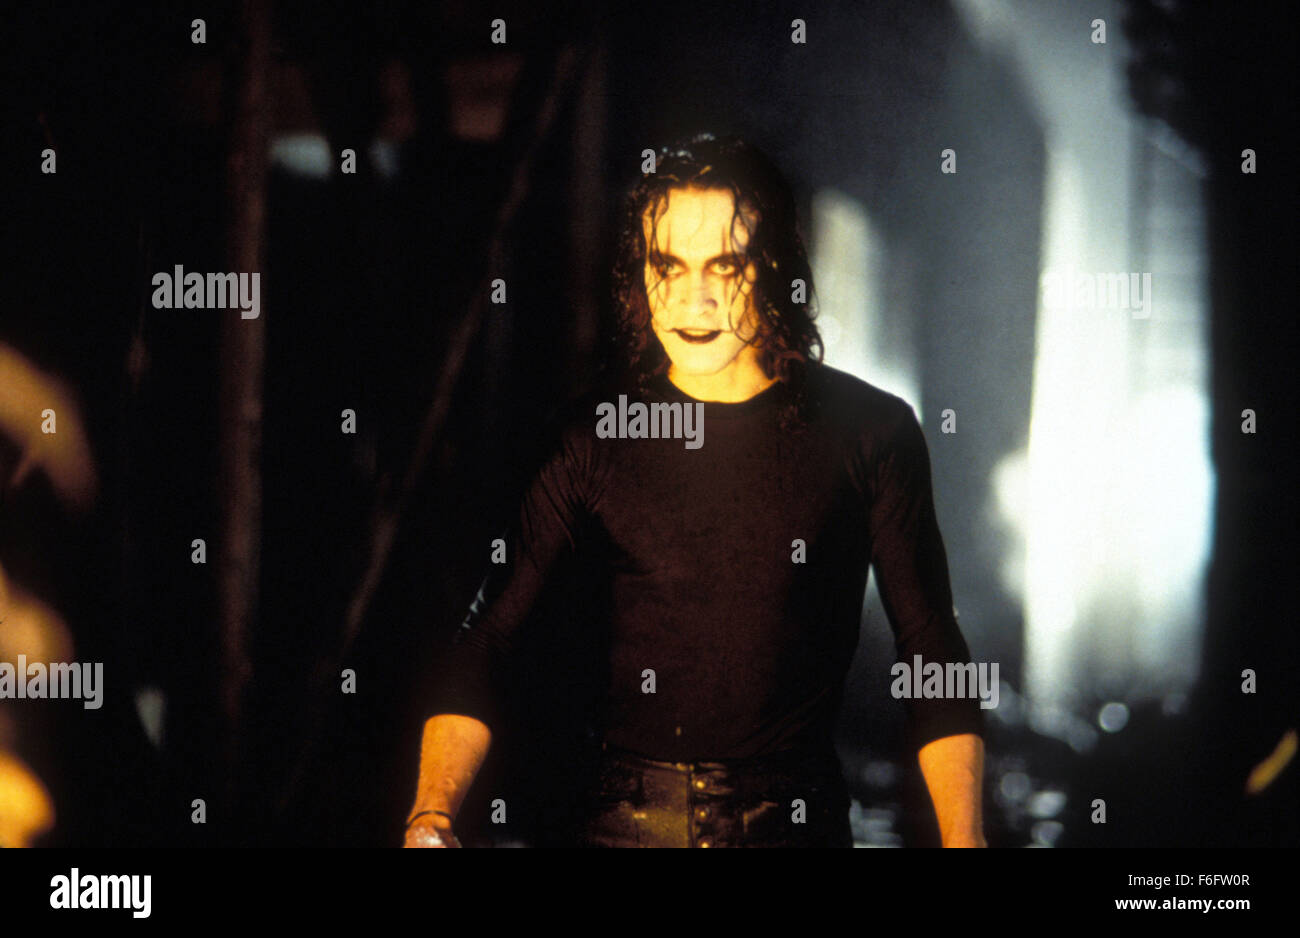 RELEASE DATE: May 11, 1994. MOVIE TITLE: The Crow. STUDIO: Miramax Films. PLOT: Eric Draven and his fiancee are brutally murdered on Devil's Night, a night when the henchmen of crime-boss Top Dollar traditionally indulge in wanton acts of violence and arson. A crow brings Draven's restless soul back from the dead and he sets out to wreak revenge upon his killers. PICTURED: BRANDON LEE as Eric Draven. Stock Photo